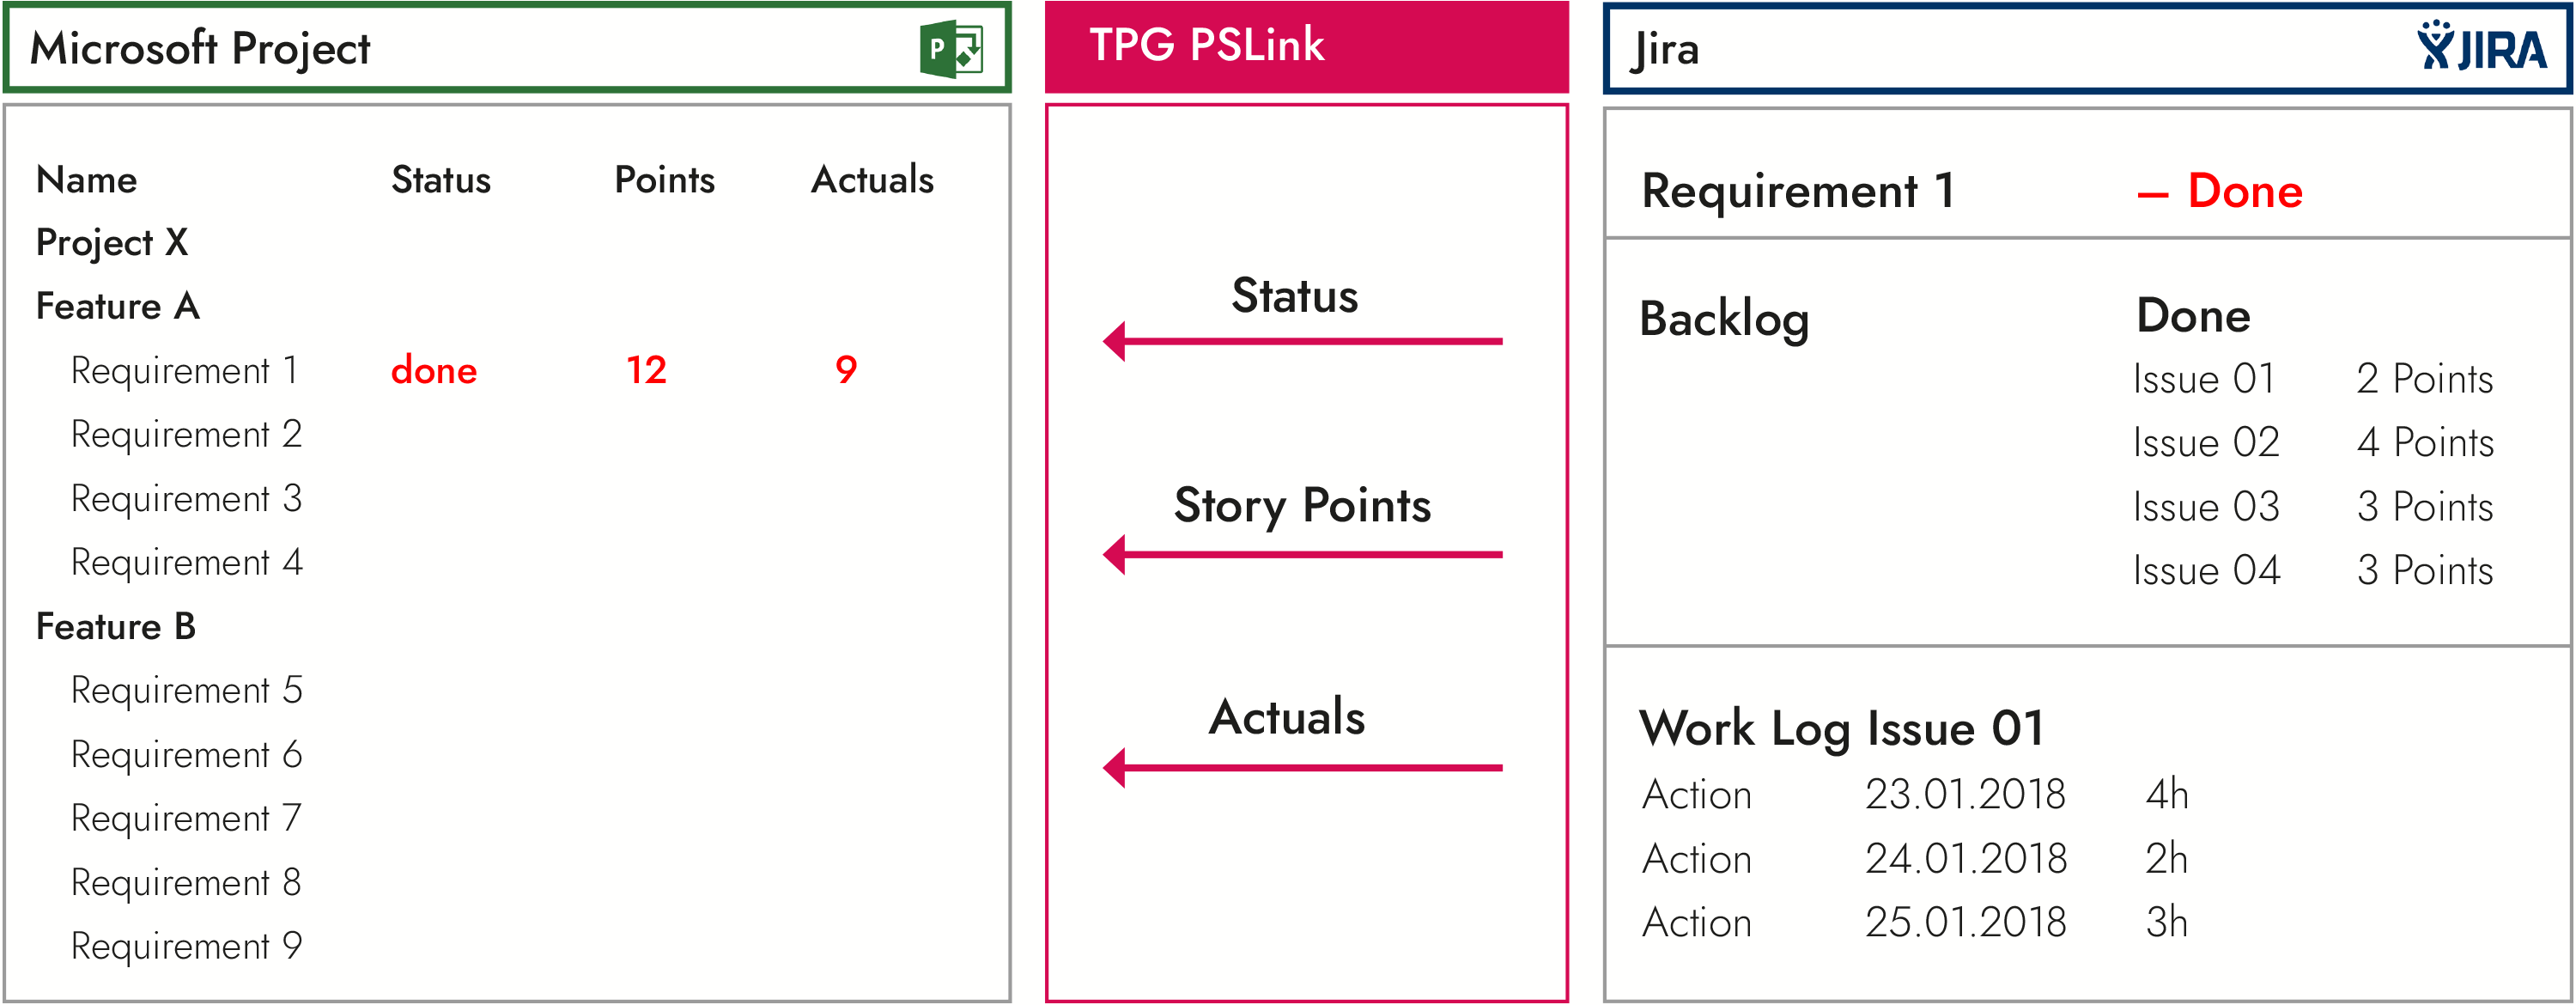 Transferring items, actual times and status from Jira into Microsoft Project (via TPG PSLink) can help in internal IT projects